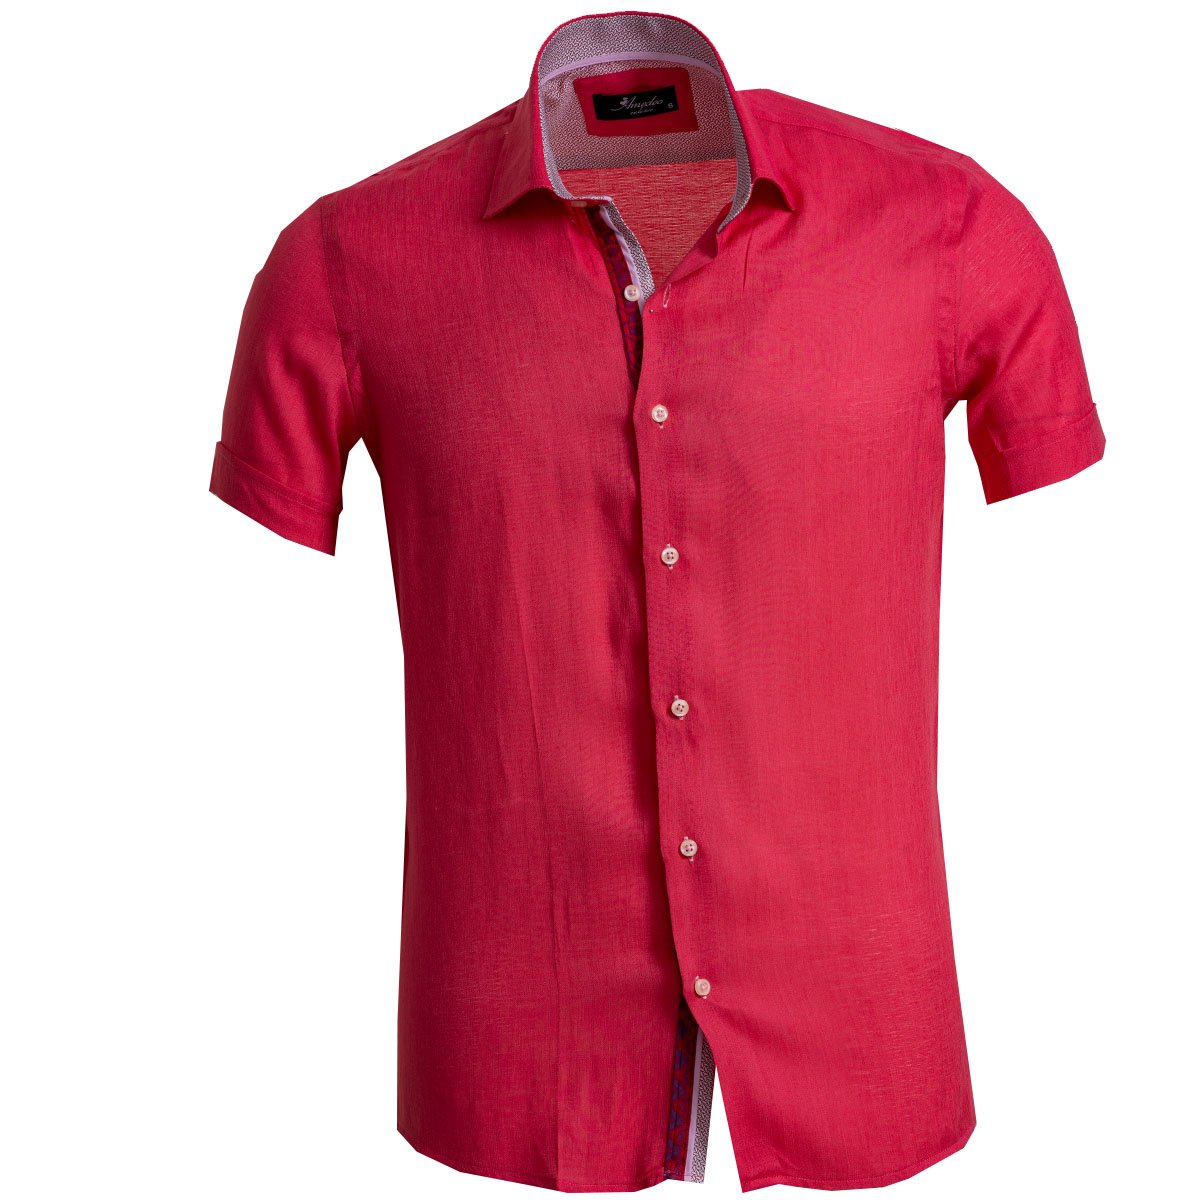 Solid Bright Red Men's Short Sleeve Button up Shirts - Tailored Slim